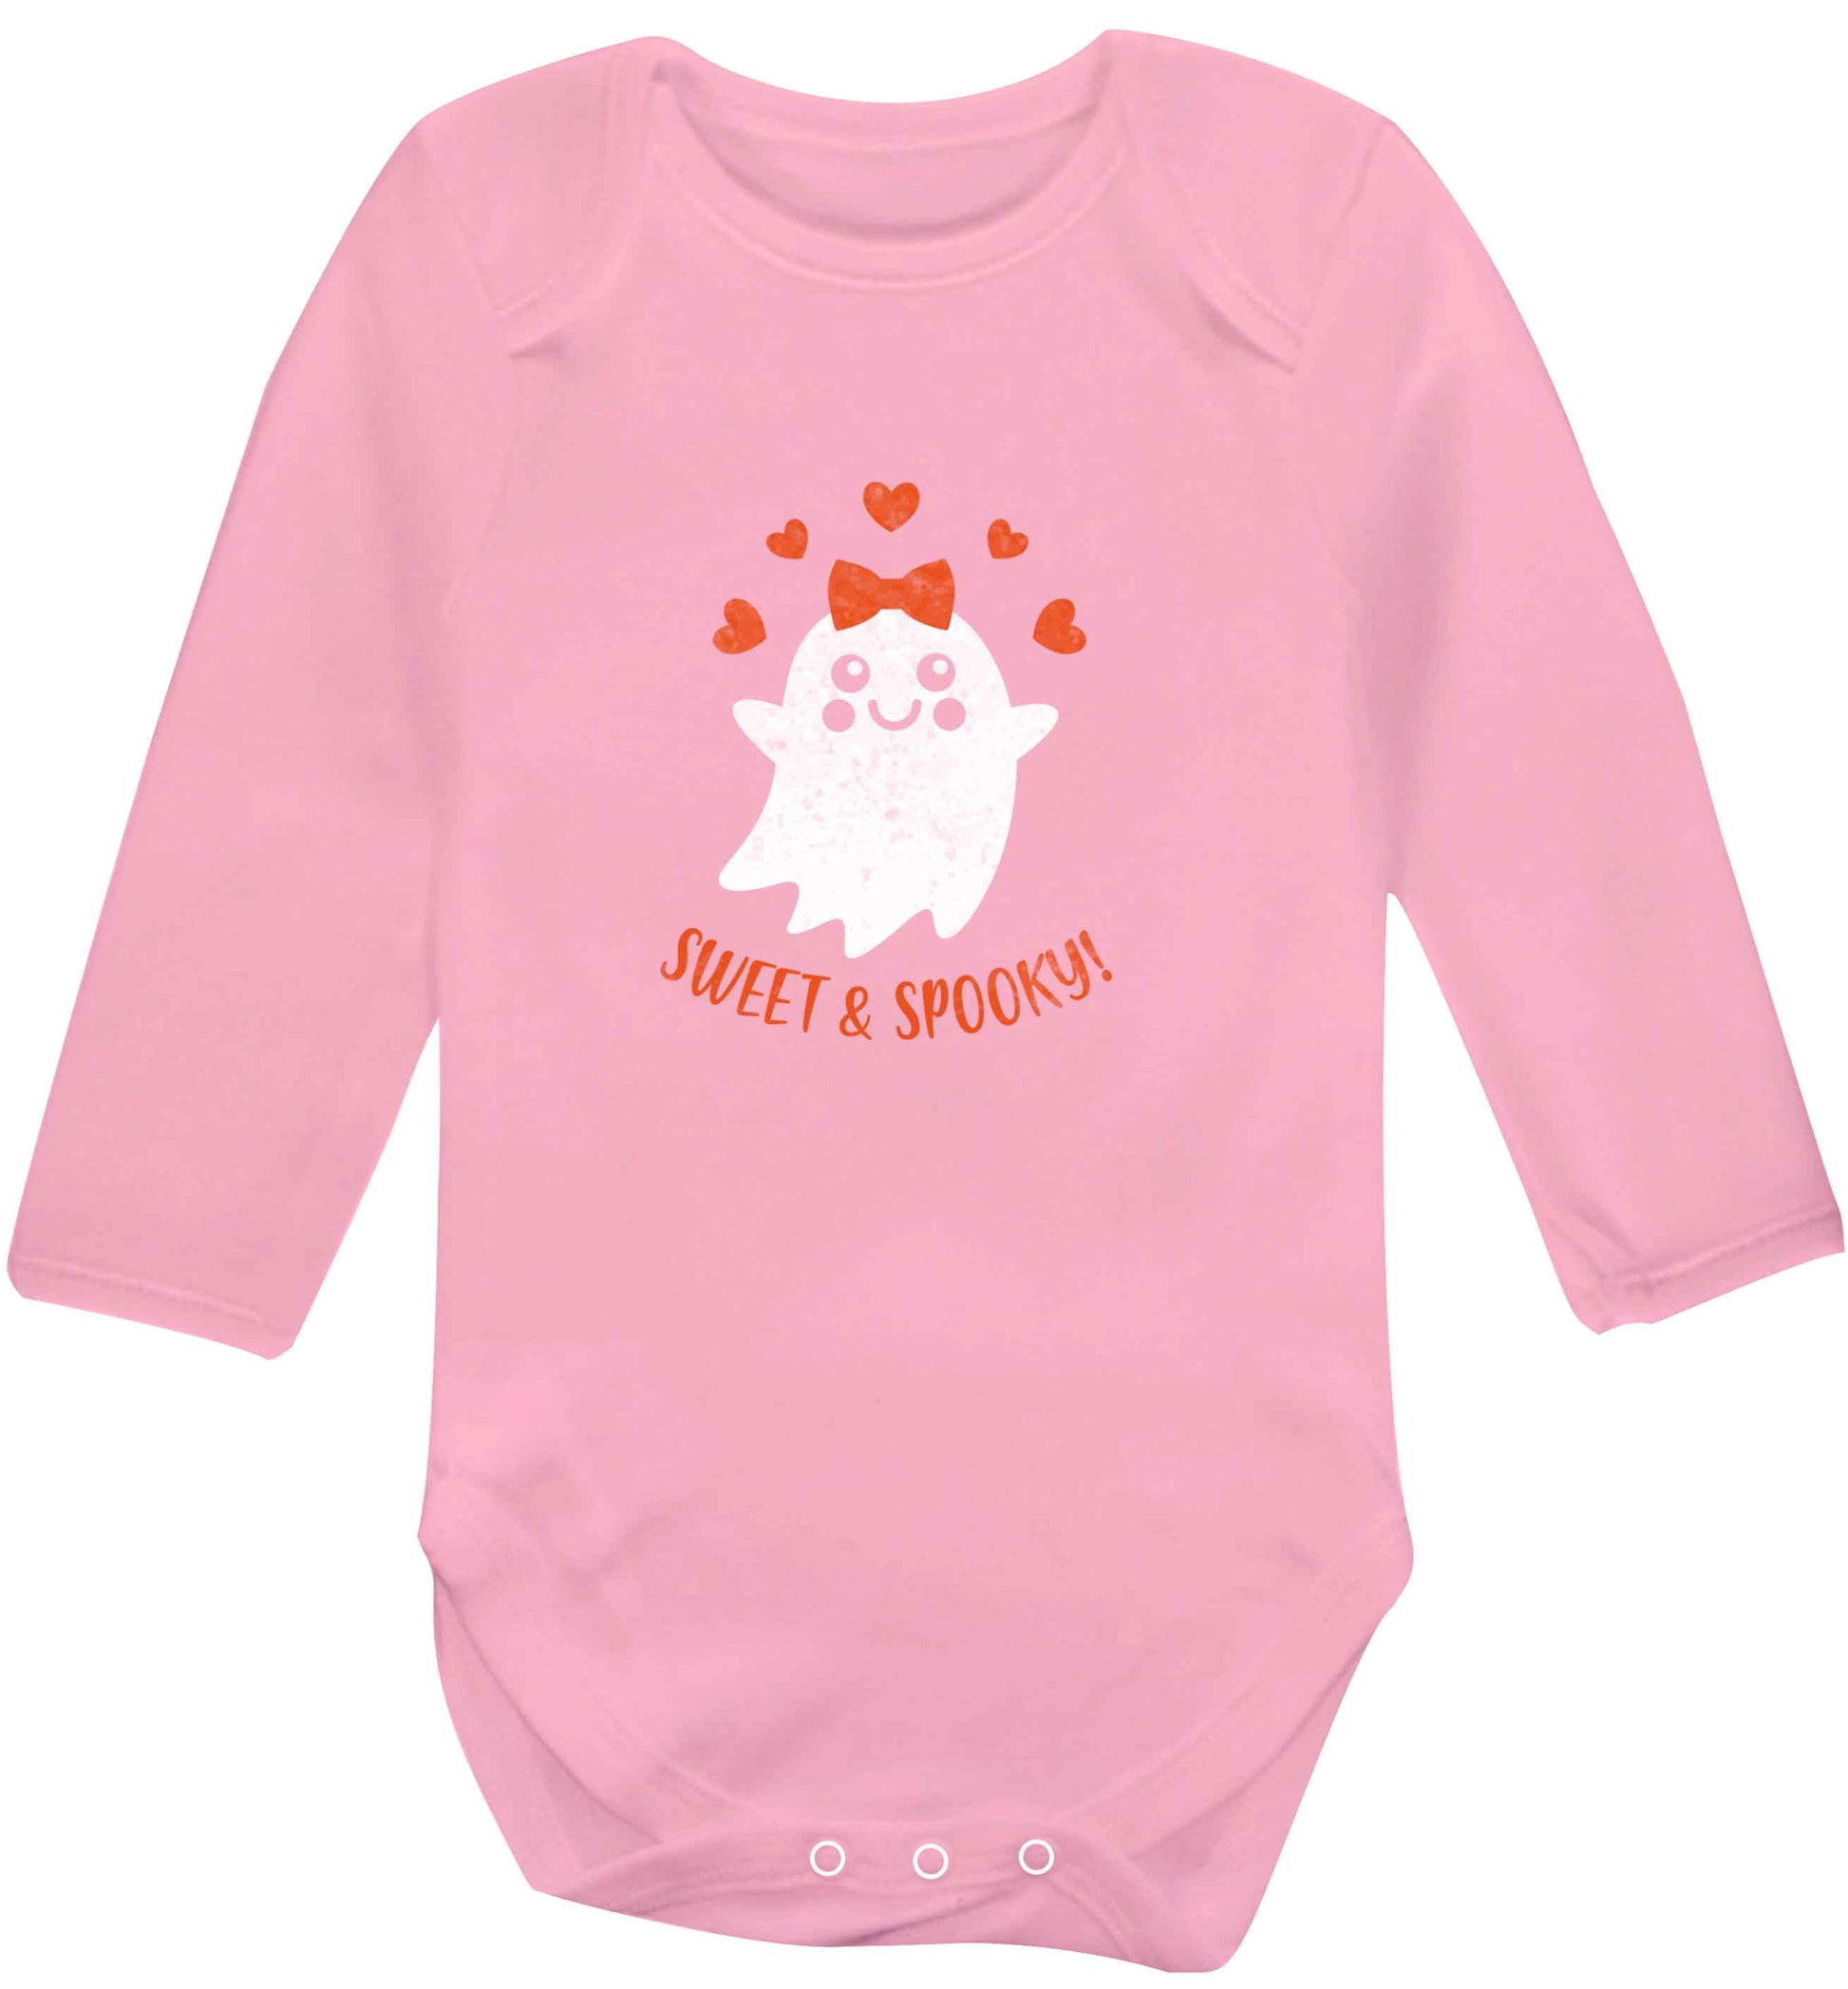 Sweet and spooky baby vest long sleeved pale pink 6-12 months